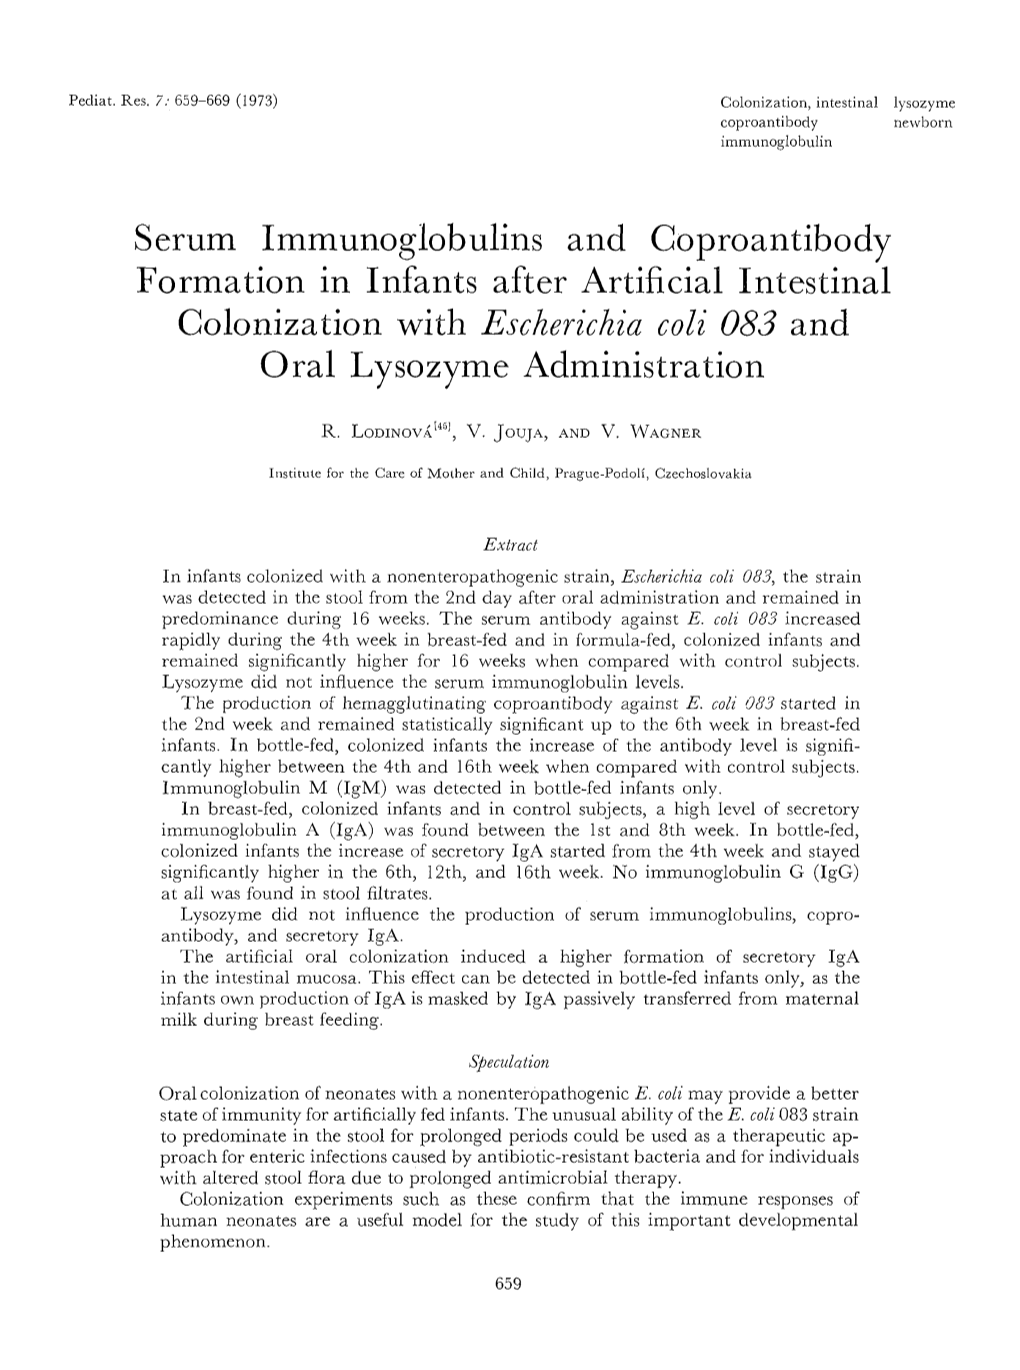 Serum Immunoglobulins and Coproantibody Formation in Infants After Artificial Intestinal Colonization with Escherichia Coli 083 and Oral Lysozyme Administration